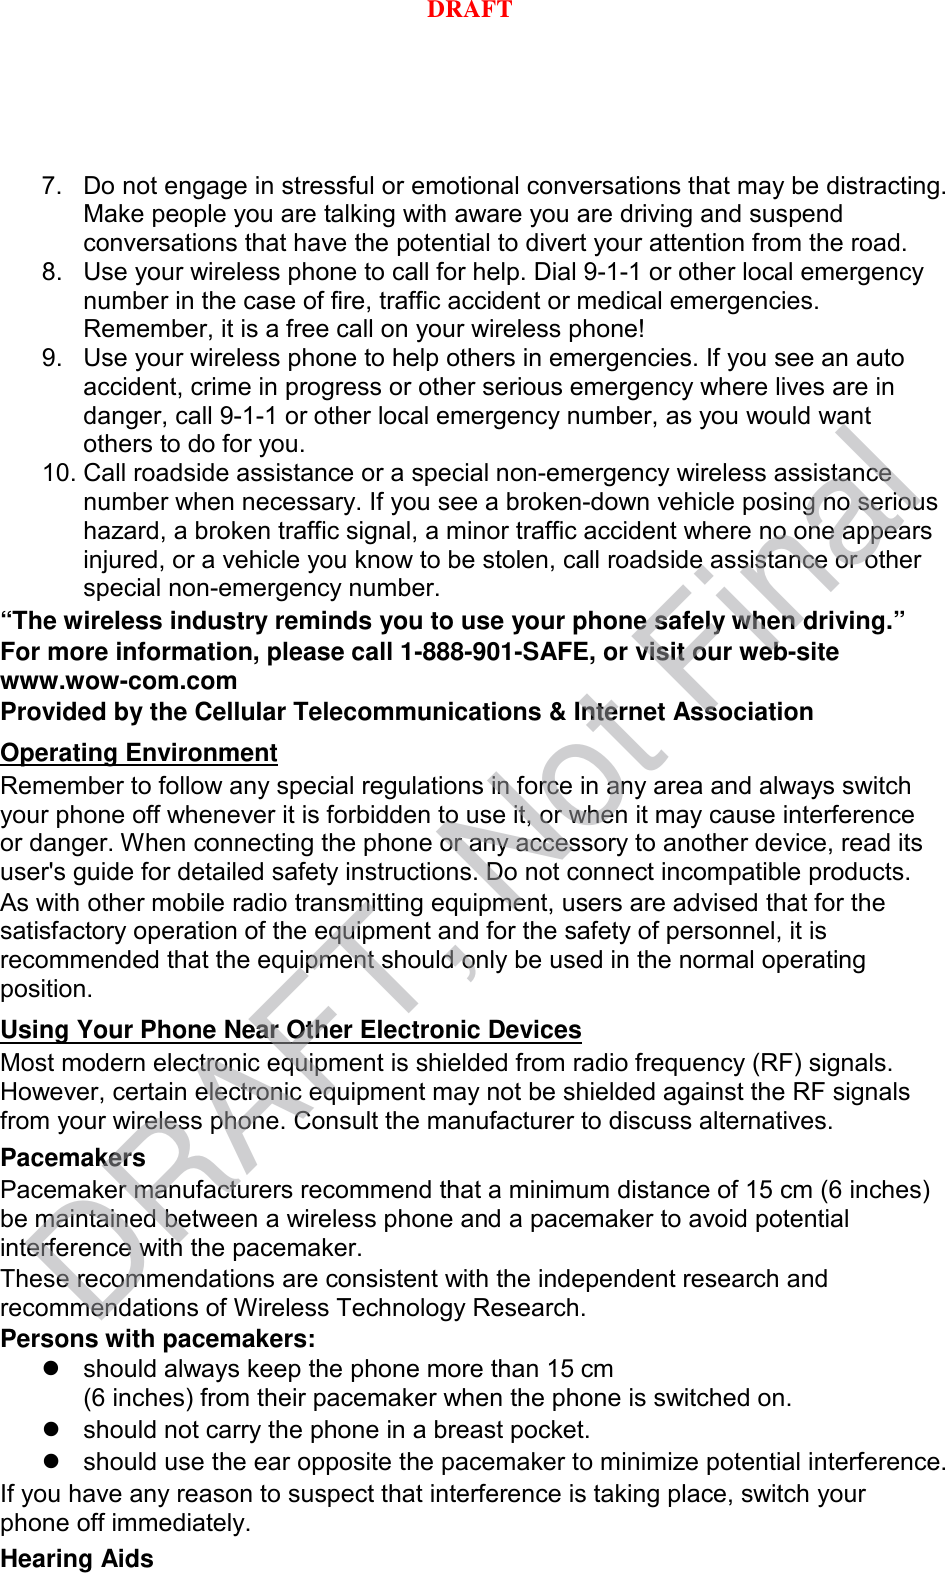 7. Do not engage in stressful or emotional conversations that may be distracting. Make people you are talking with aware you are driving and suspend conversations that have the potential to divert your attention from the road. 8. Use your wireless phone to call for help. Dial 9-1-1 or other local emergency number in the case of fire, traffic accident or medical emergencies. Remember, it is a free call on your wireless phone! 9. Use your wireless phone to help others in emergencies. If you see an auto accident, crime in progress or other serious emergency where lives are in danger, call 9-1-1 or other local emergency number, as you would want others to do for you. 10. Call roadside assistance or a special non-emergency wireless assistance number when necessary. If you see a broken-down vehicle posing no serious hazard, a broken traffic signal, a minor traffic accident where no one appears injured, or a vehicle you know to be stolen, call roadside assistance or other special non-emergency number. “The wireless industry reminds you to use your phone safely when driving.” For more information, please call 1-888-901-SAFE, or visit our web-site www.wow-com.com Provided by the Cellular Telecommunications &amp; Internet Association Remember to follow any special regulations in force in any area and always switch your phone off whenever it is forbidden to use it, or when it may cause interference or danger. When connecting the phone or any accessory to another device, read its user&apos;s guide for detailed safety instructions. Do not connect incompatible products. Operating Environment As with other mobile radio transmitting equipment, users are advised that for the satisfactory operation of the equipment and for the safety of personnel, it is recommended that the equipment should only be used in the normal operating position. Most modern electronic equipment is shielded from radio frequency (RF) signals. However, certain electronic equipment may not be shielded against the RF signals from your wireless phone. Consult the manufacturer to discuss alternatives. Using Your Phone Near Other Electronic Devices Pacemakers Pacemaker manufacturers recommend that a minimum distance of 15 cm (6 inches) be maintained between a wireless phone and a pacemaker to avoid potential interference with the pacemaker. These recommendations are consistent with the independent research and recommendations of Wireless Technology Research. Persons with pacemakers:  should always keep the phone more than 15 cm   (6 inches) from their pacemaker when the phone is switched on.  should not carry the phone in a breast pocket.  should use the ear opposite the pacemaker to minimize potential interference. If you have any reason to suspect that interference is taking place, switch your phone off immediately. Hearing Aids DRAFT, Not FinalDRAFT